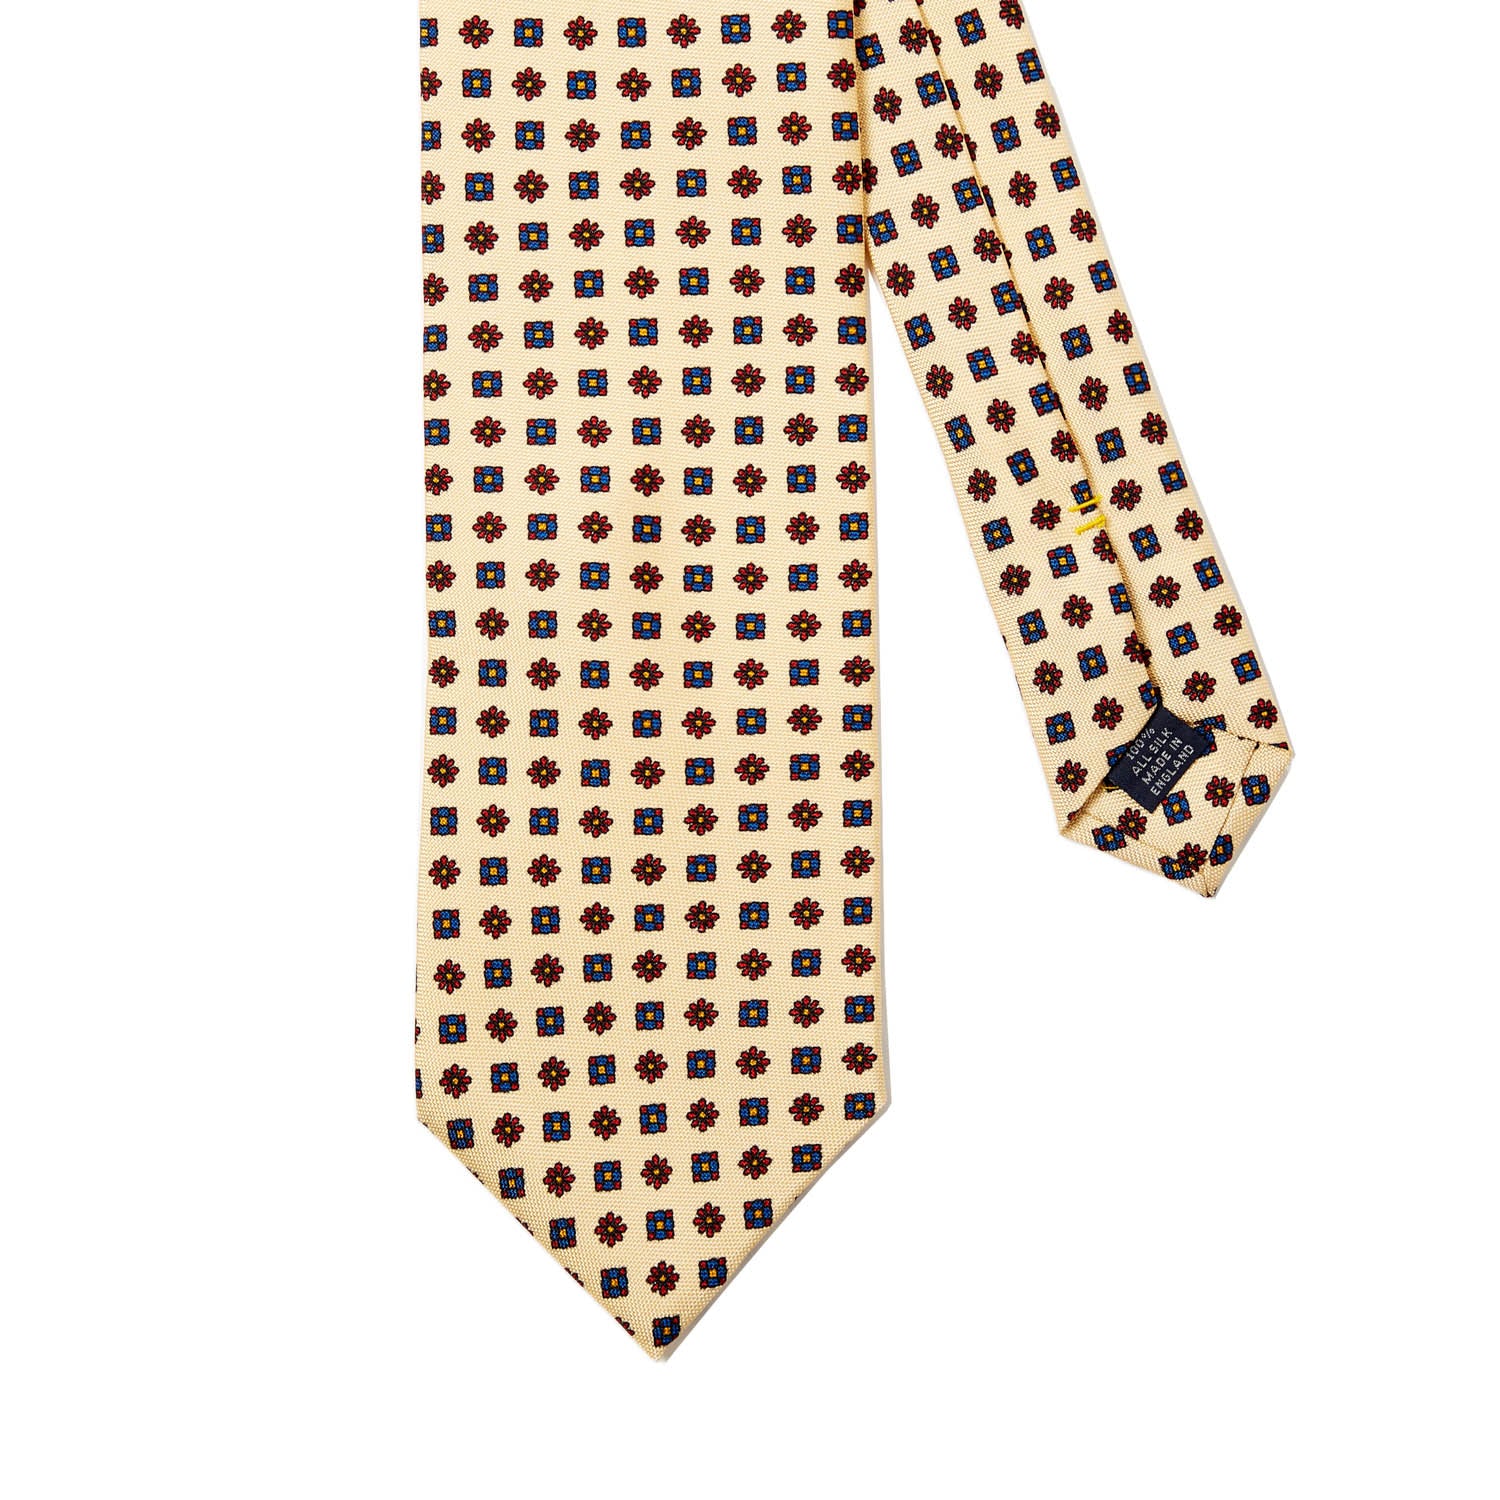 A Sovereign Grade Cream Floral 25oz Silk Hopsack Tie (150x8.5 cm) from KirbyAllison.com, with polka dots on a white background, showcasing craftsmanship from the United Kingdom.